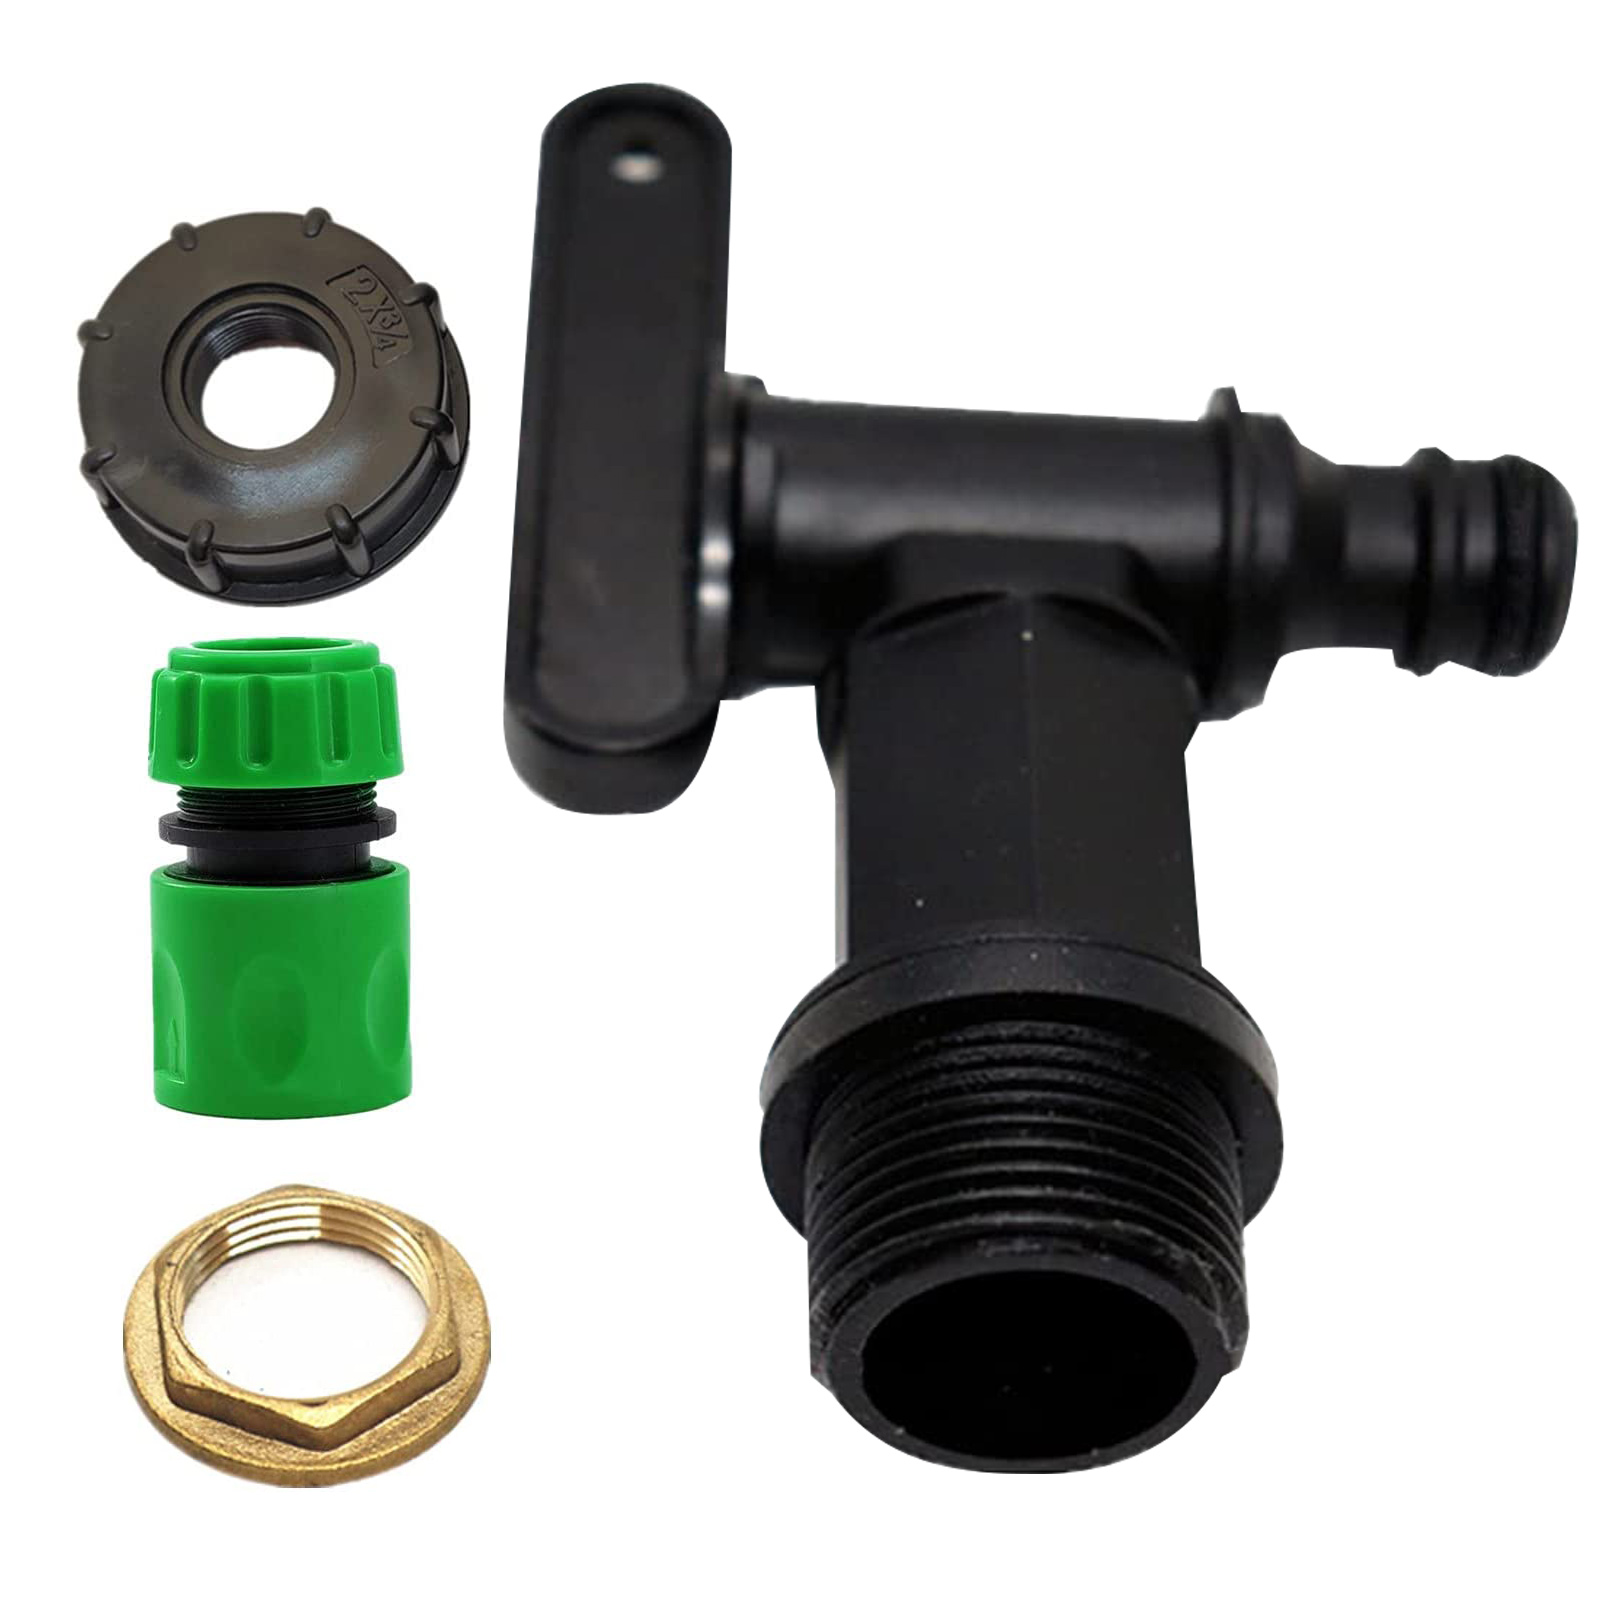 Adapter s60x6 Junction Overflow 1" Hose 3m Tap 3/4" Suction Hose Pressure 